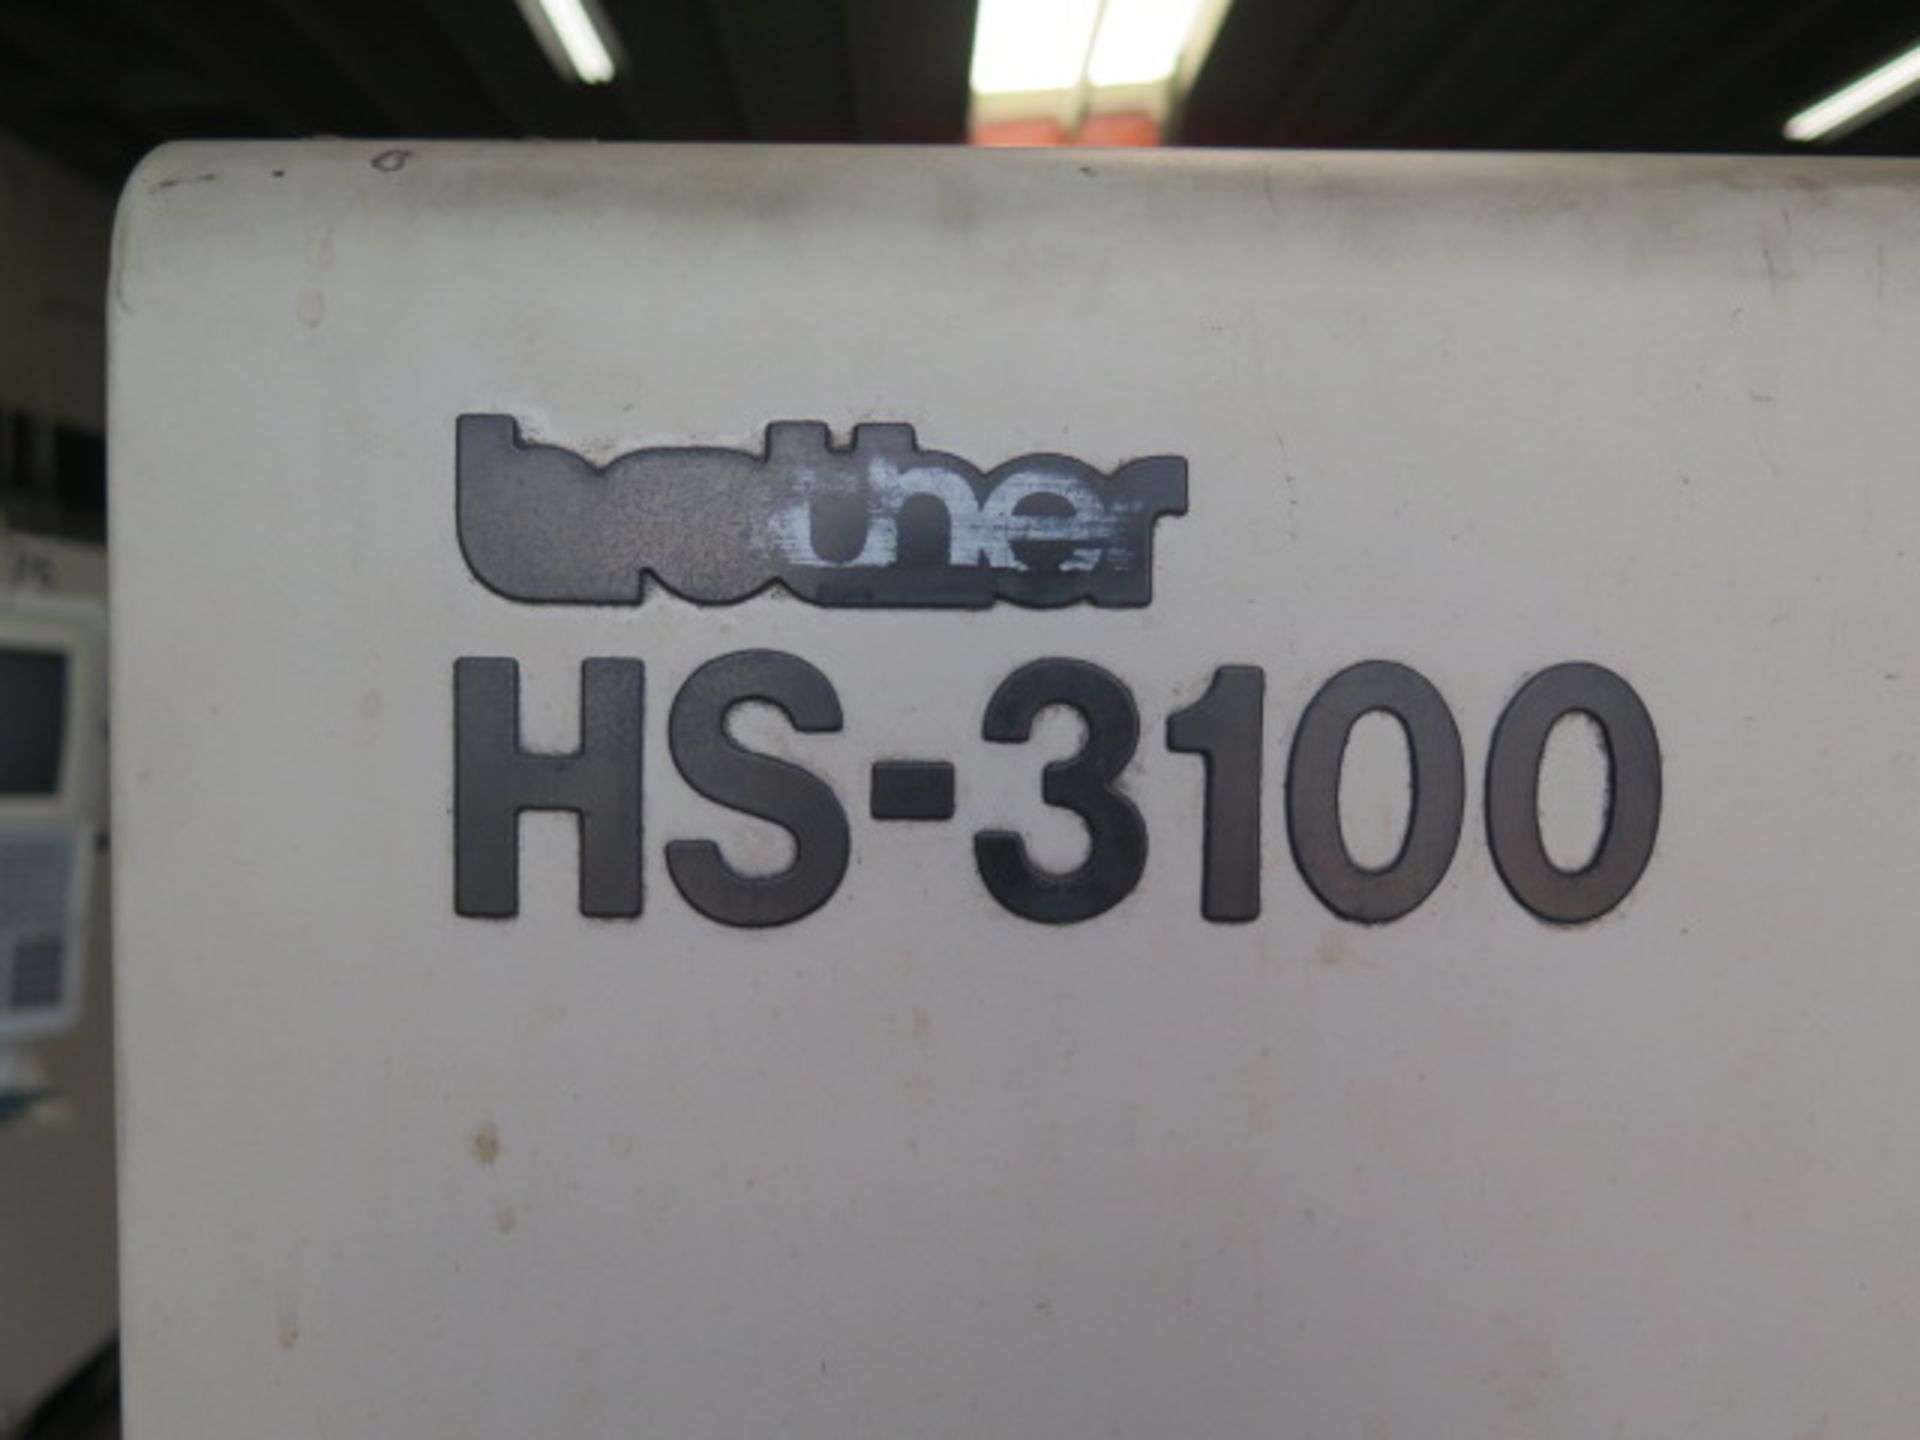 Brother HS-3100 CNC Wire EDM s/n 111120 w/ Brother CNC Controls, 8 3/4" x 11" Work Area, SOLD AS IS - Image 3 of 13